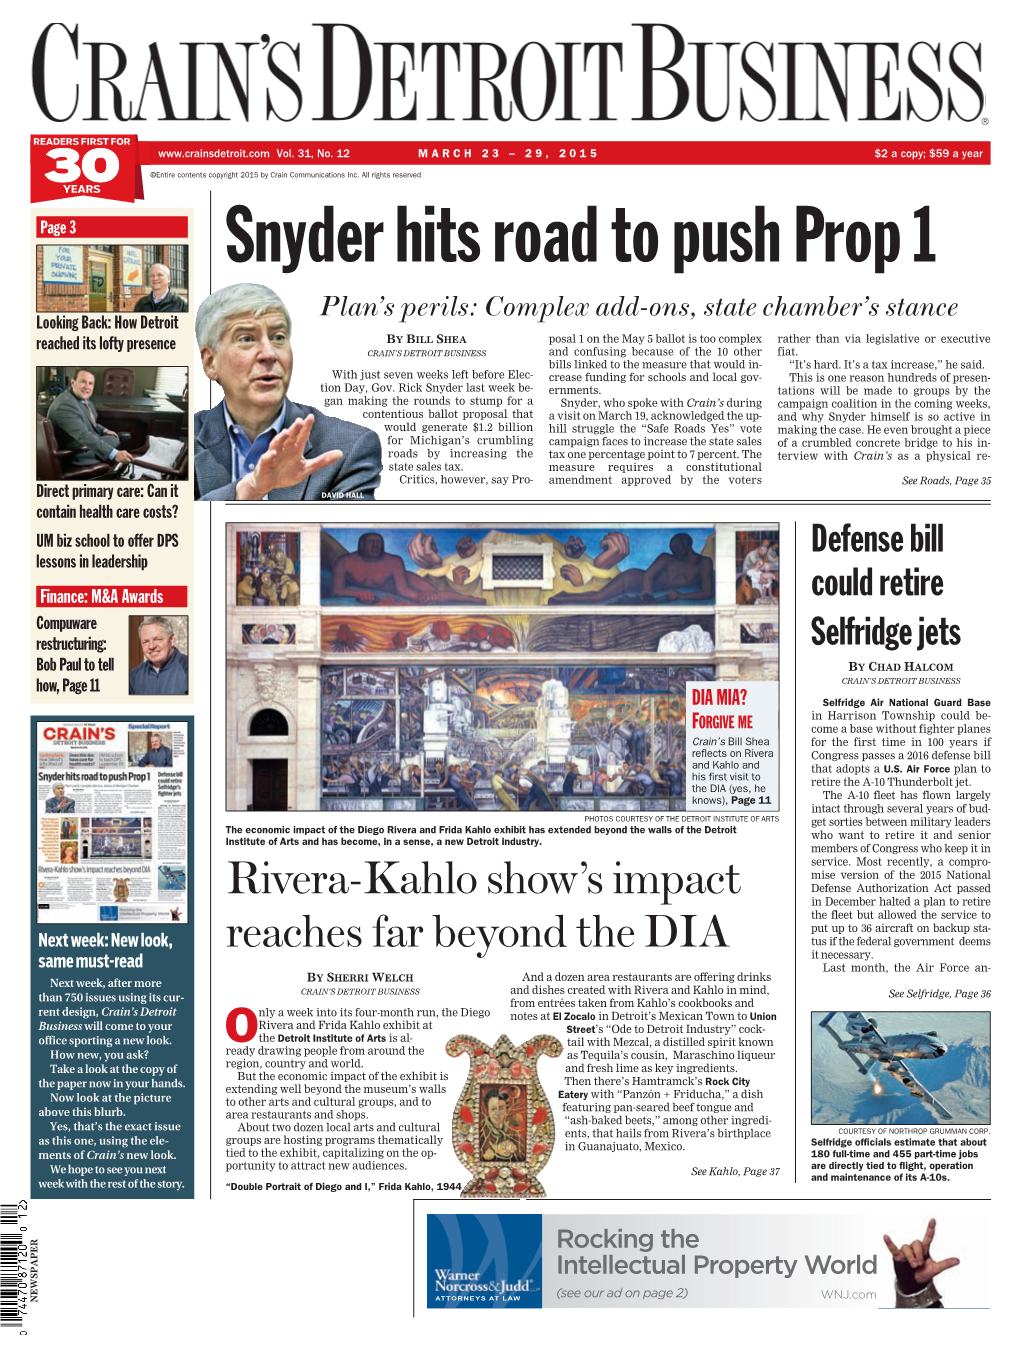 Snyder Hits Road to Push Prop 1